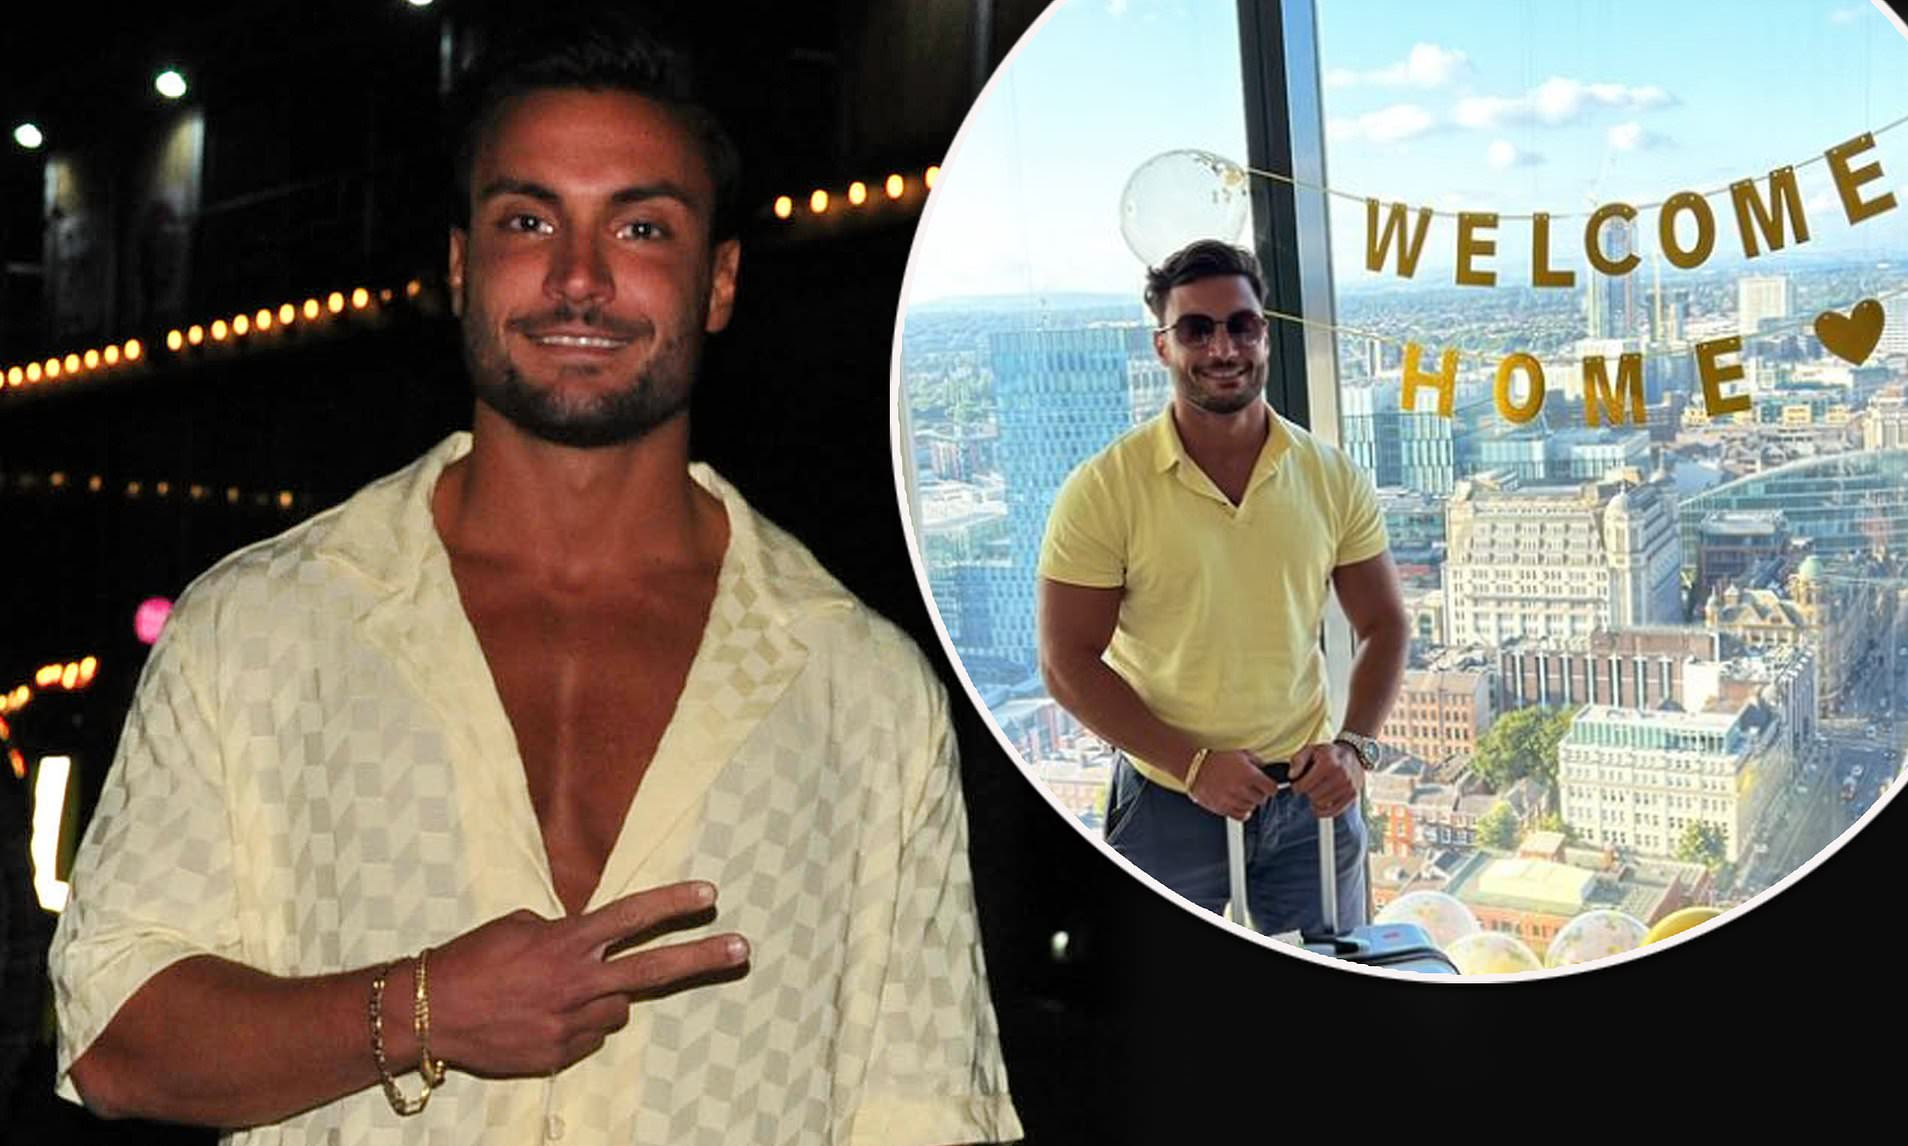 Davide's welcomed home with a sweet party in his apartment in Manchester